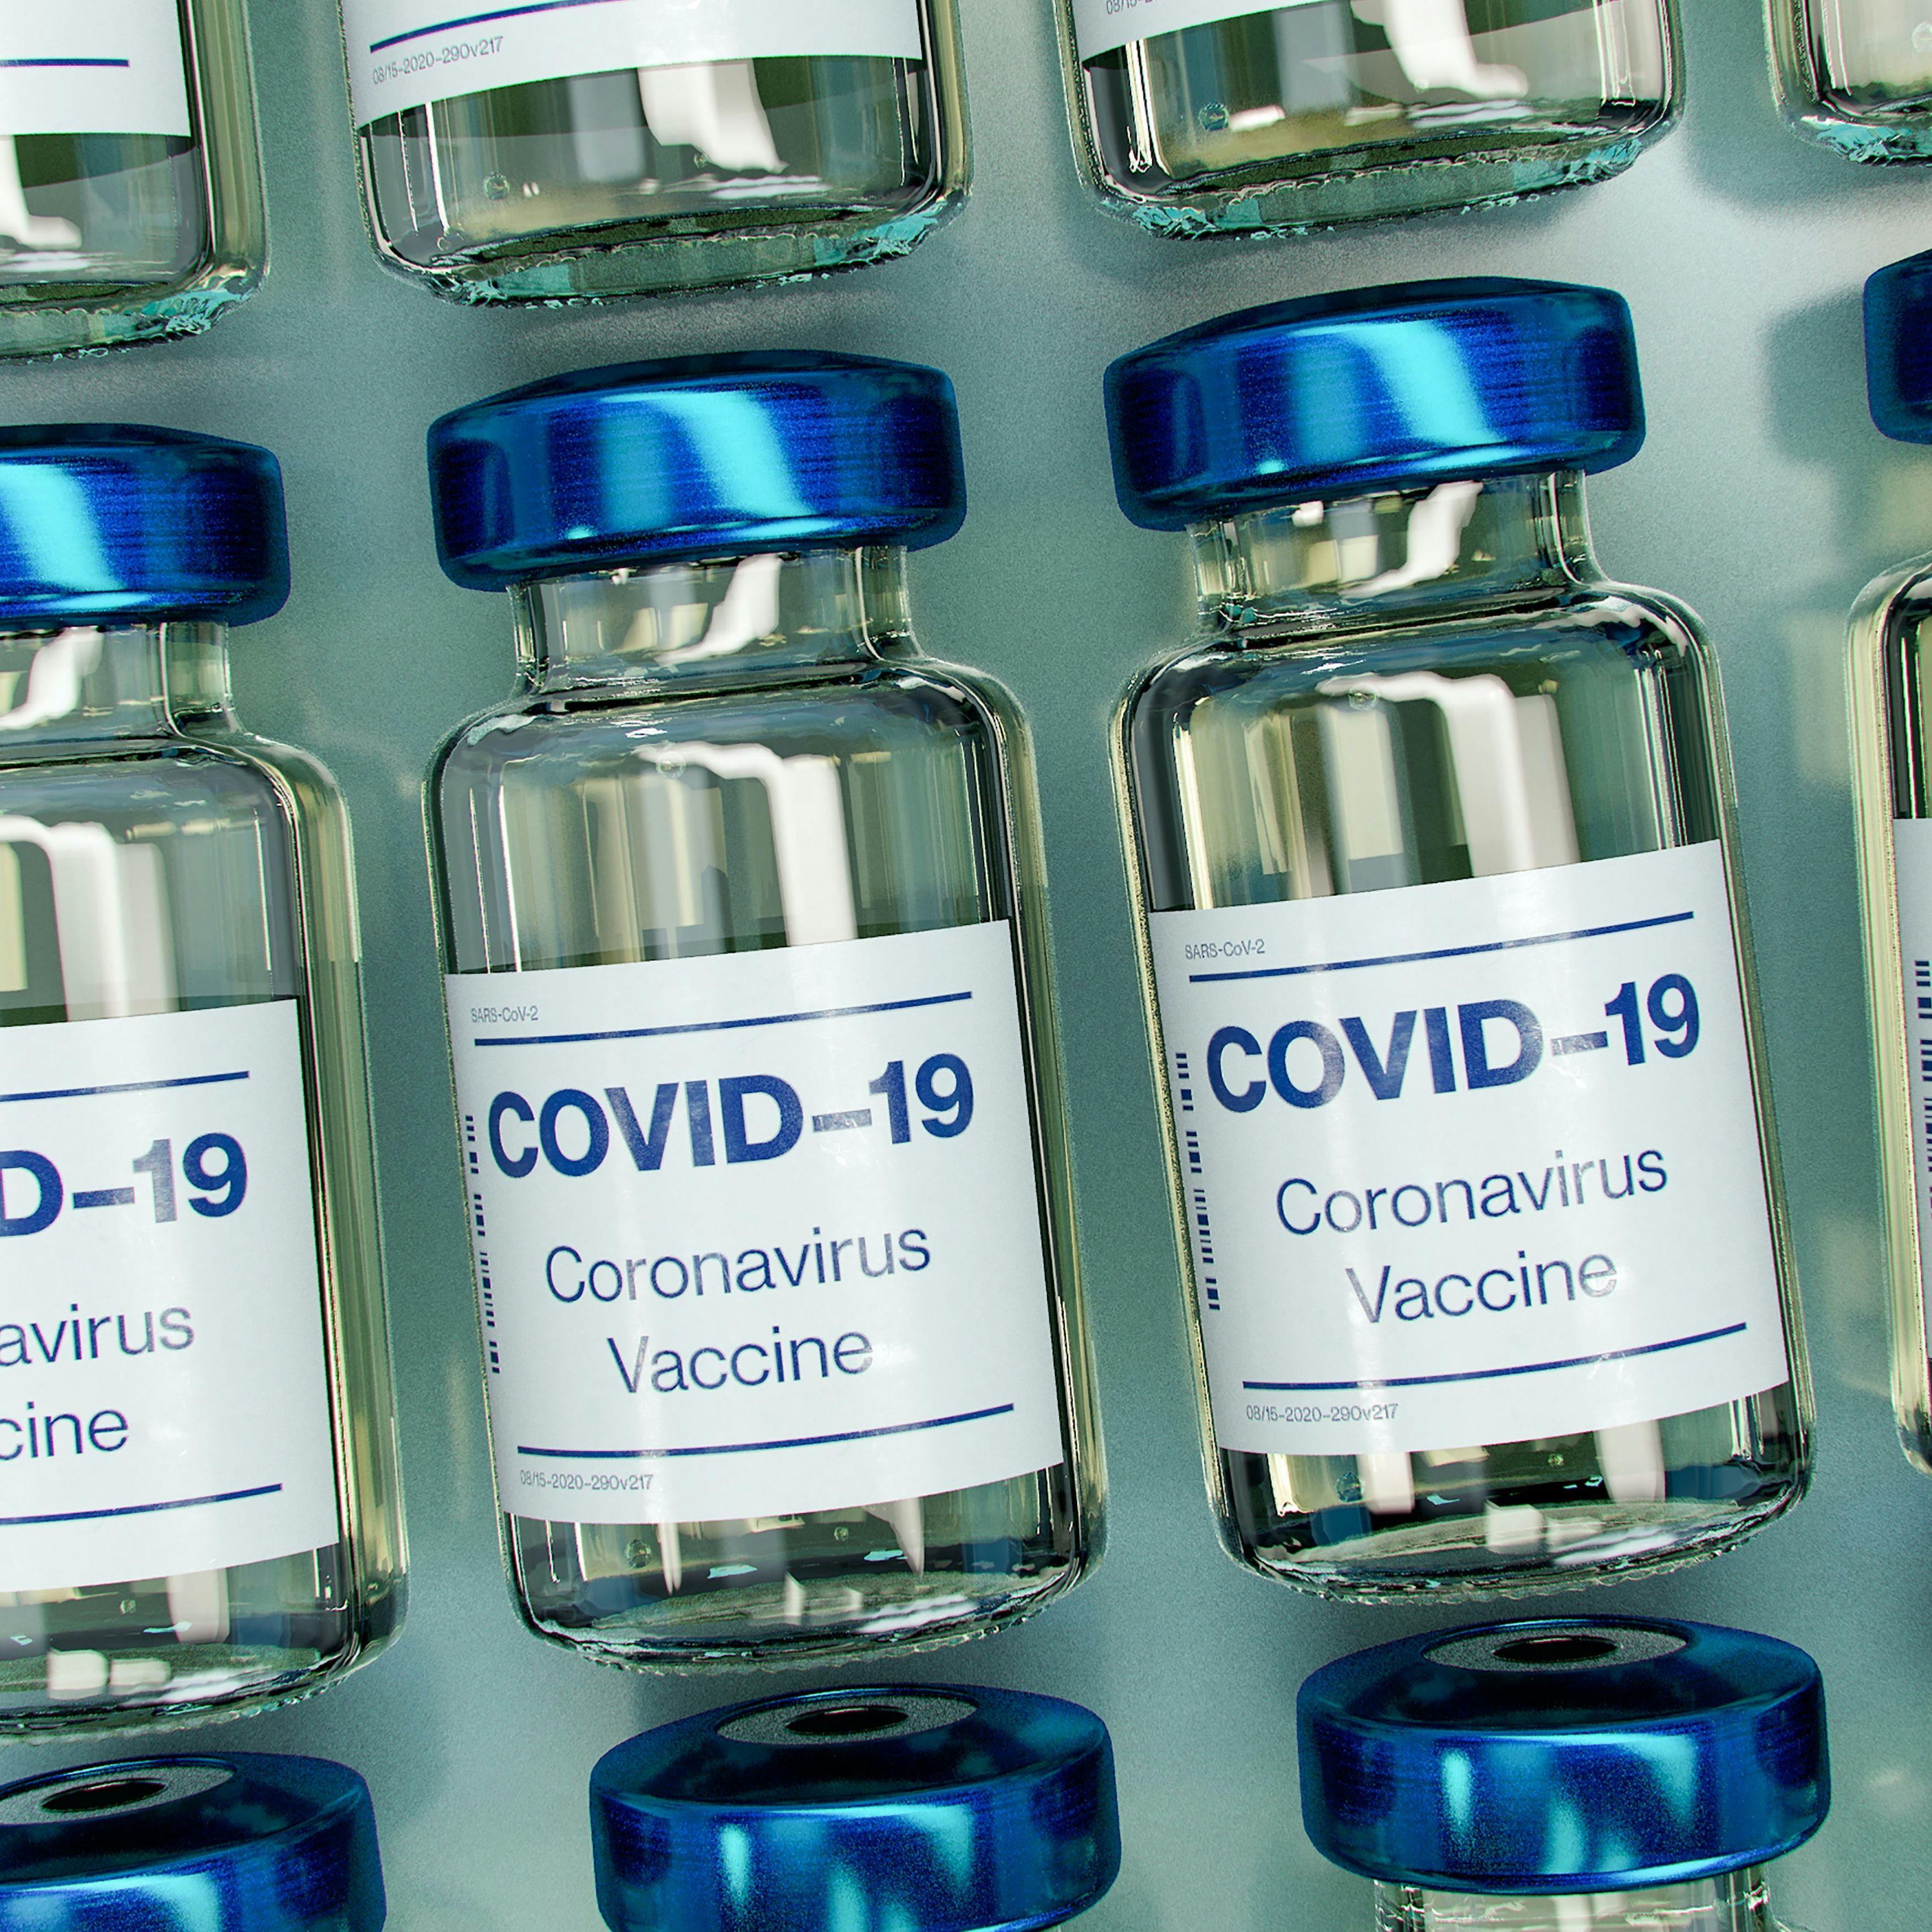 How Soon Will COVID-19 Vaccine Booster Doses Be Available in the US?